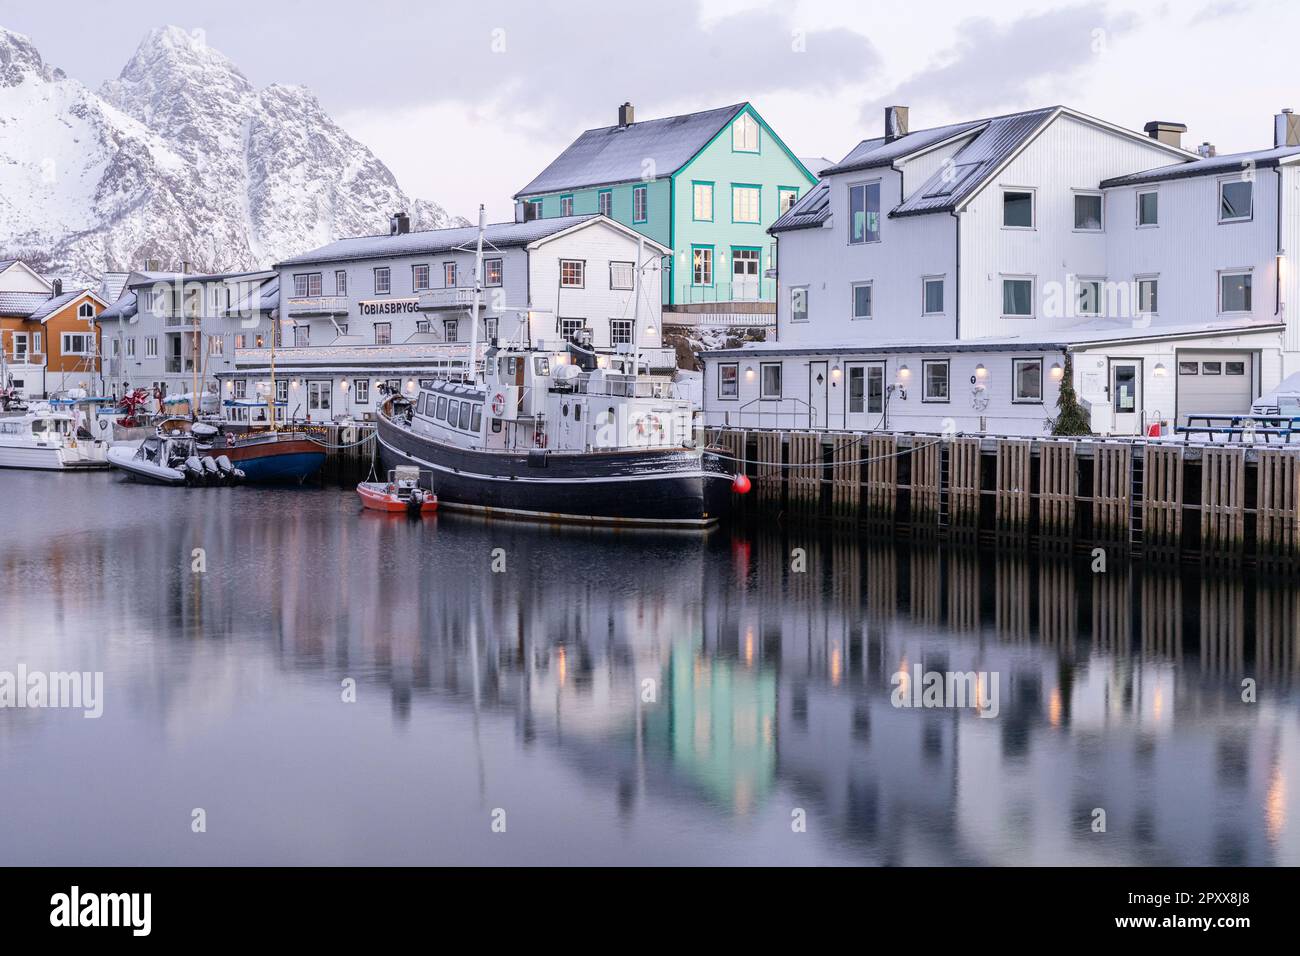 Winterscape of Henningsvaer in january Stock Photo